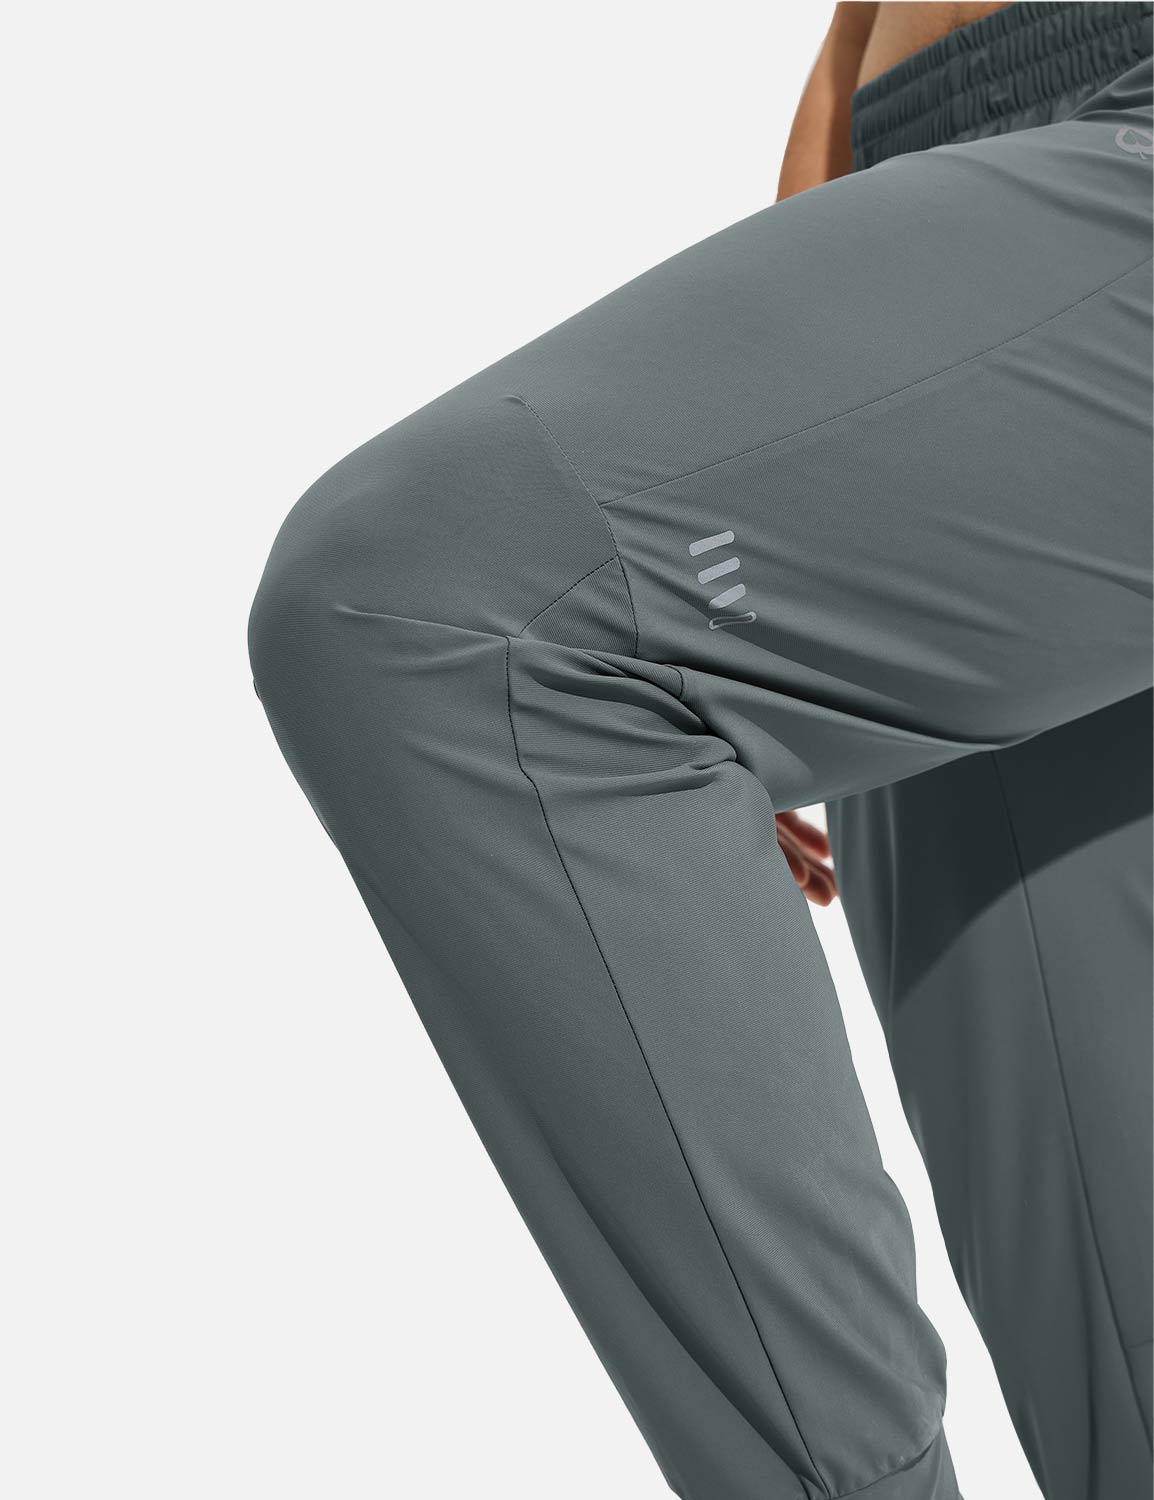 Baleaf Men's High-Stretchy Quick-Dry Joggers Pants Smoked Pearl Details